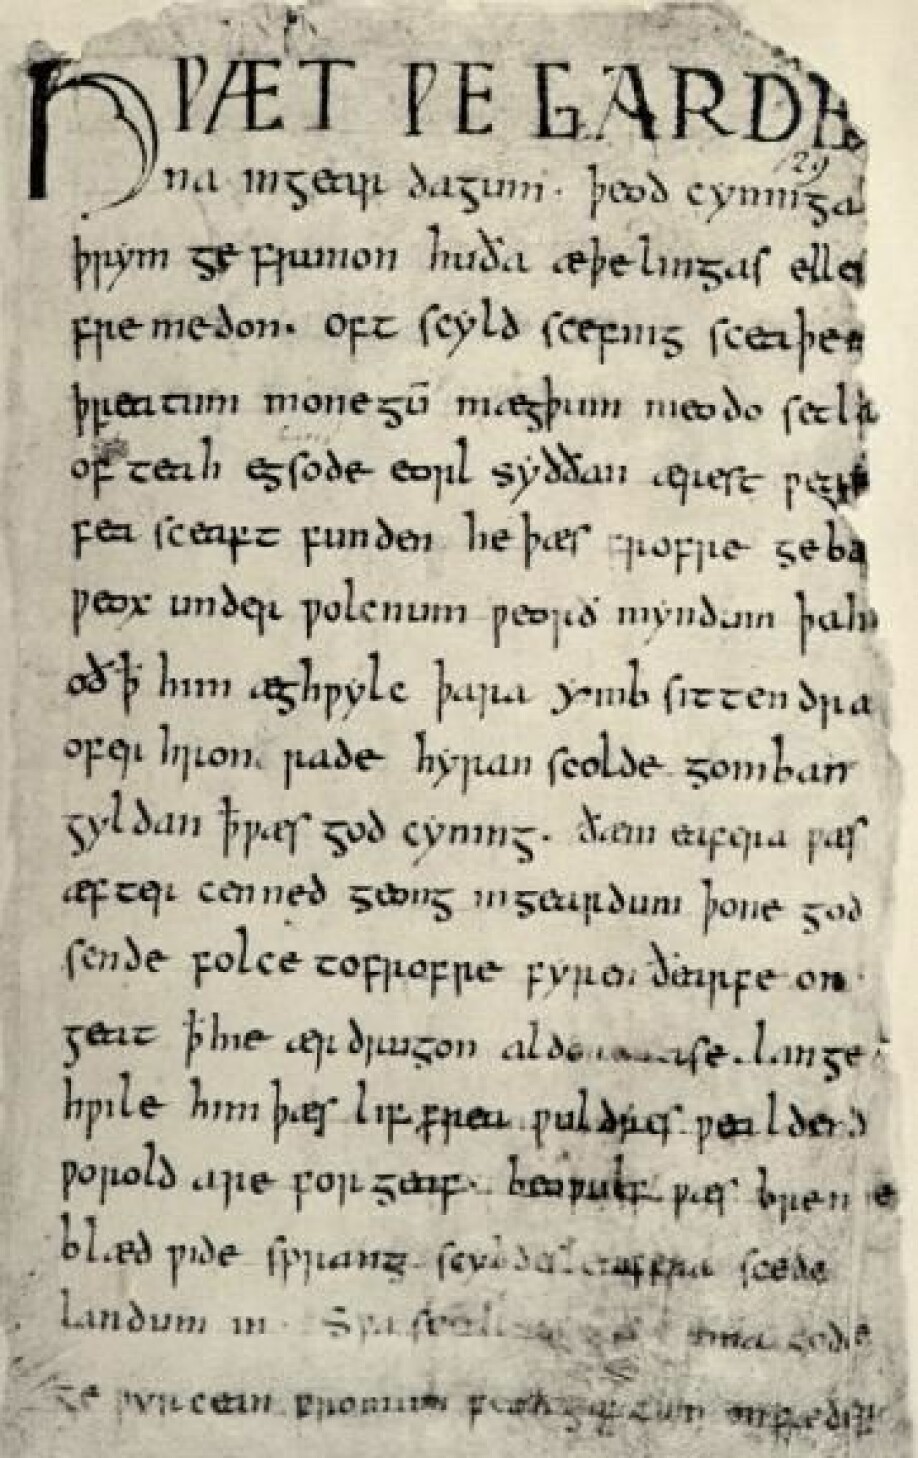 Here is the first page of the copy of Beowulf from the 1000s. This edition was probably written down at the court of Knut the Mighty (Knut the Great), King of Denmark and England. He was also Norway's overlord from 1028 to 1035.